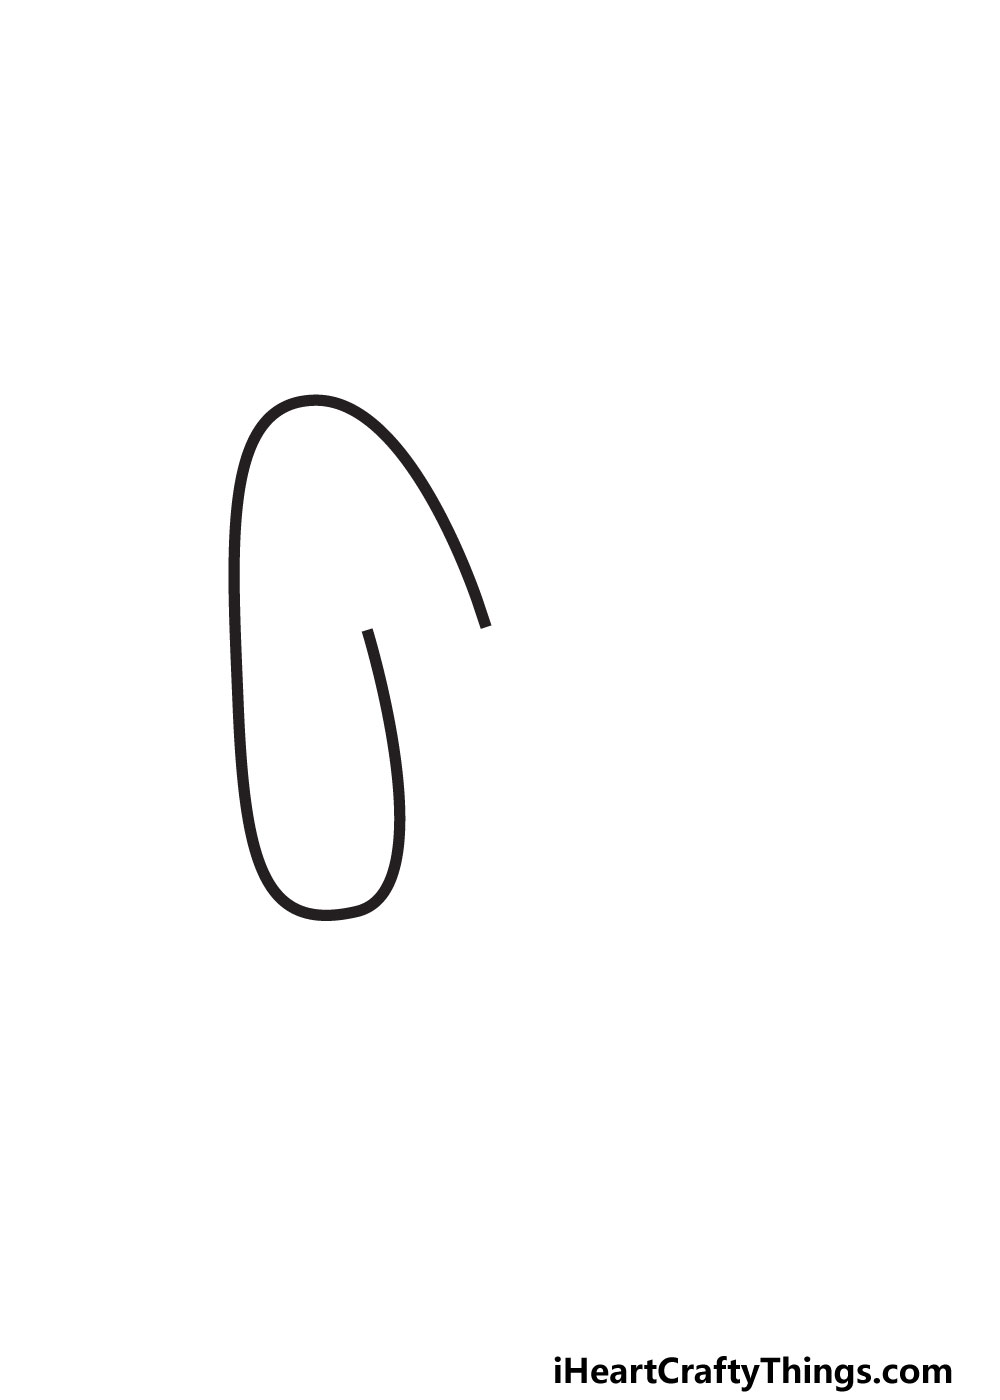 How To Draw Your Own Bubble M step 2